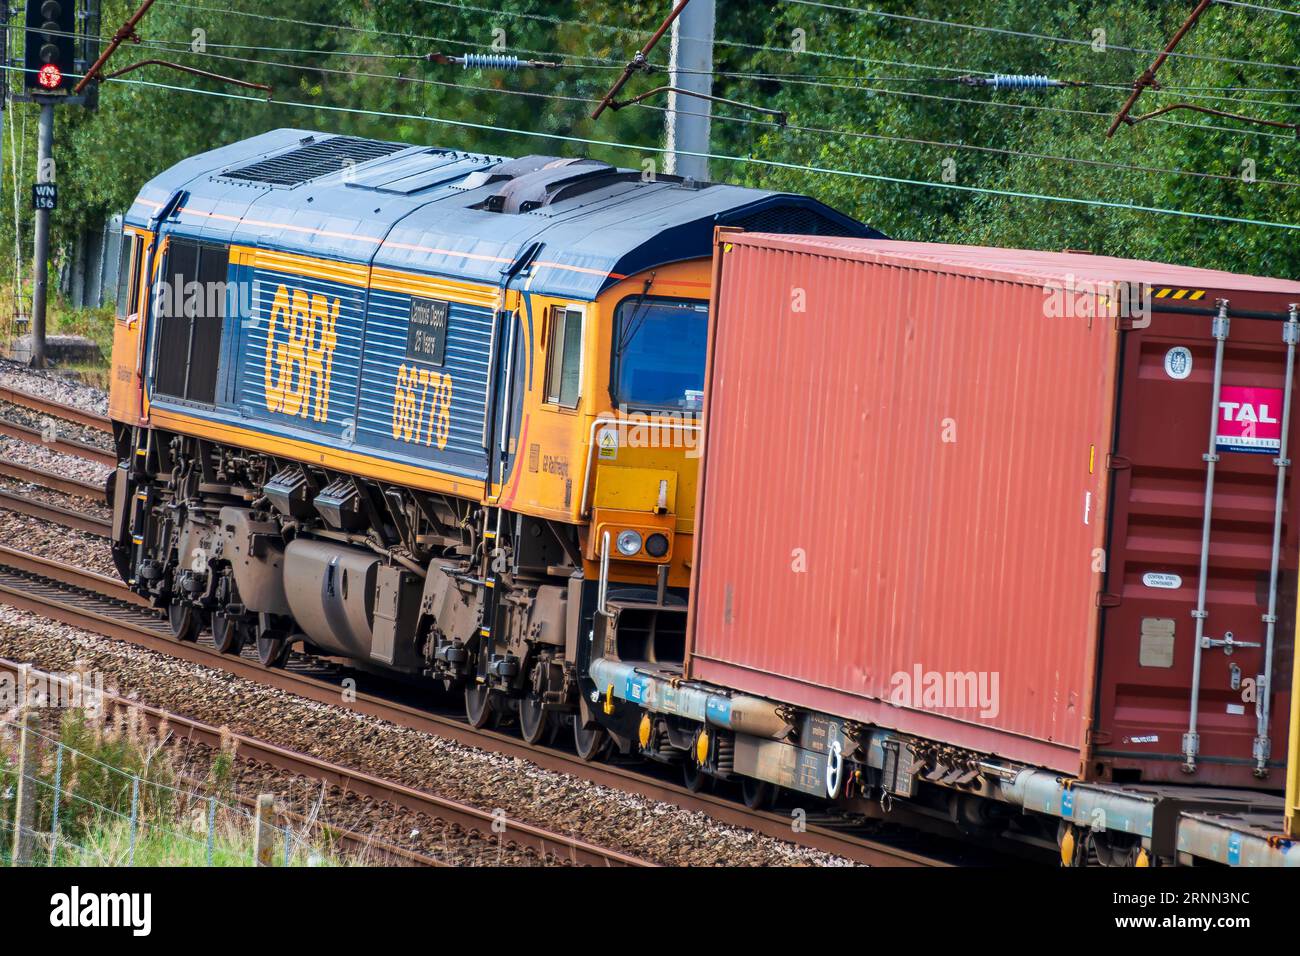 GBRF Class 66 Diesel electric freight locomotive named Cambois Depot on the West Coast main line at Winwick. Stock Photo